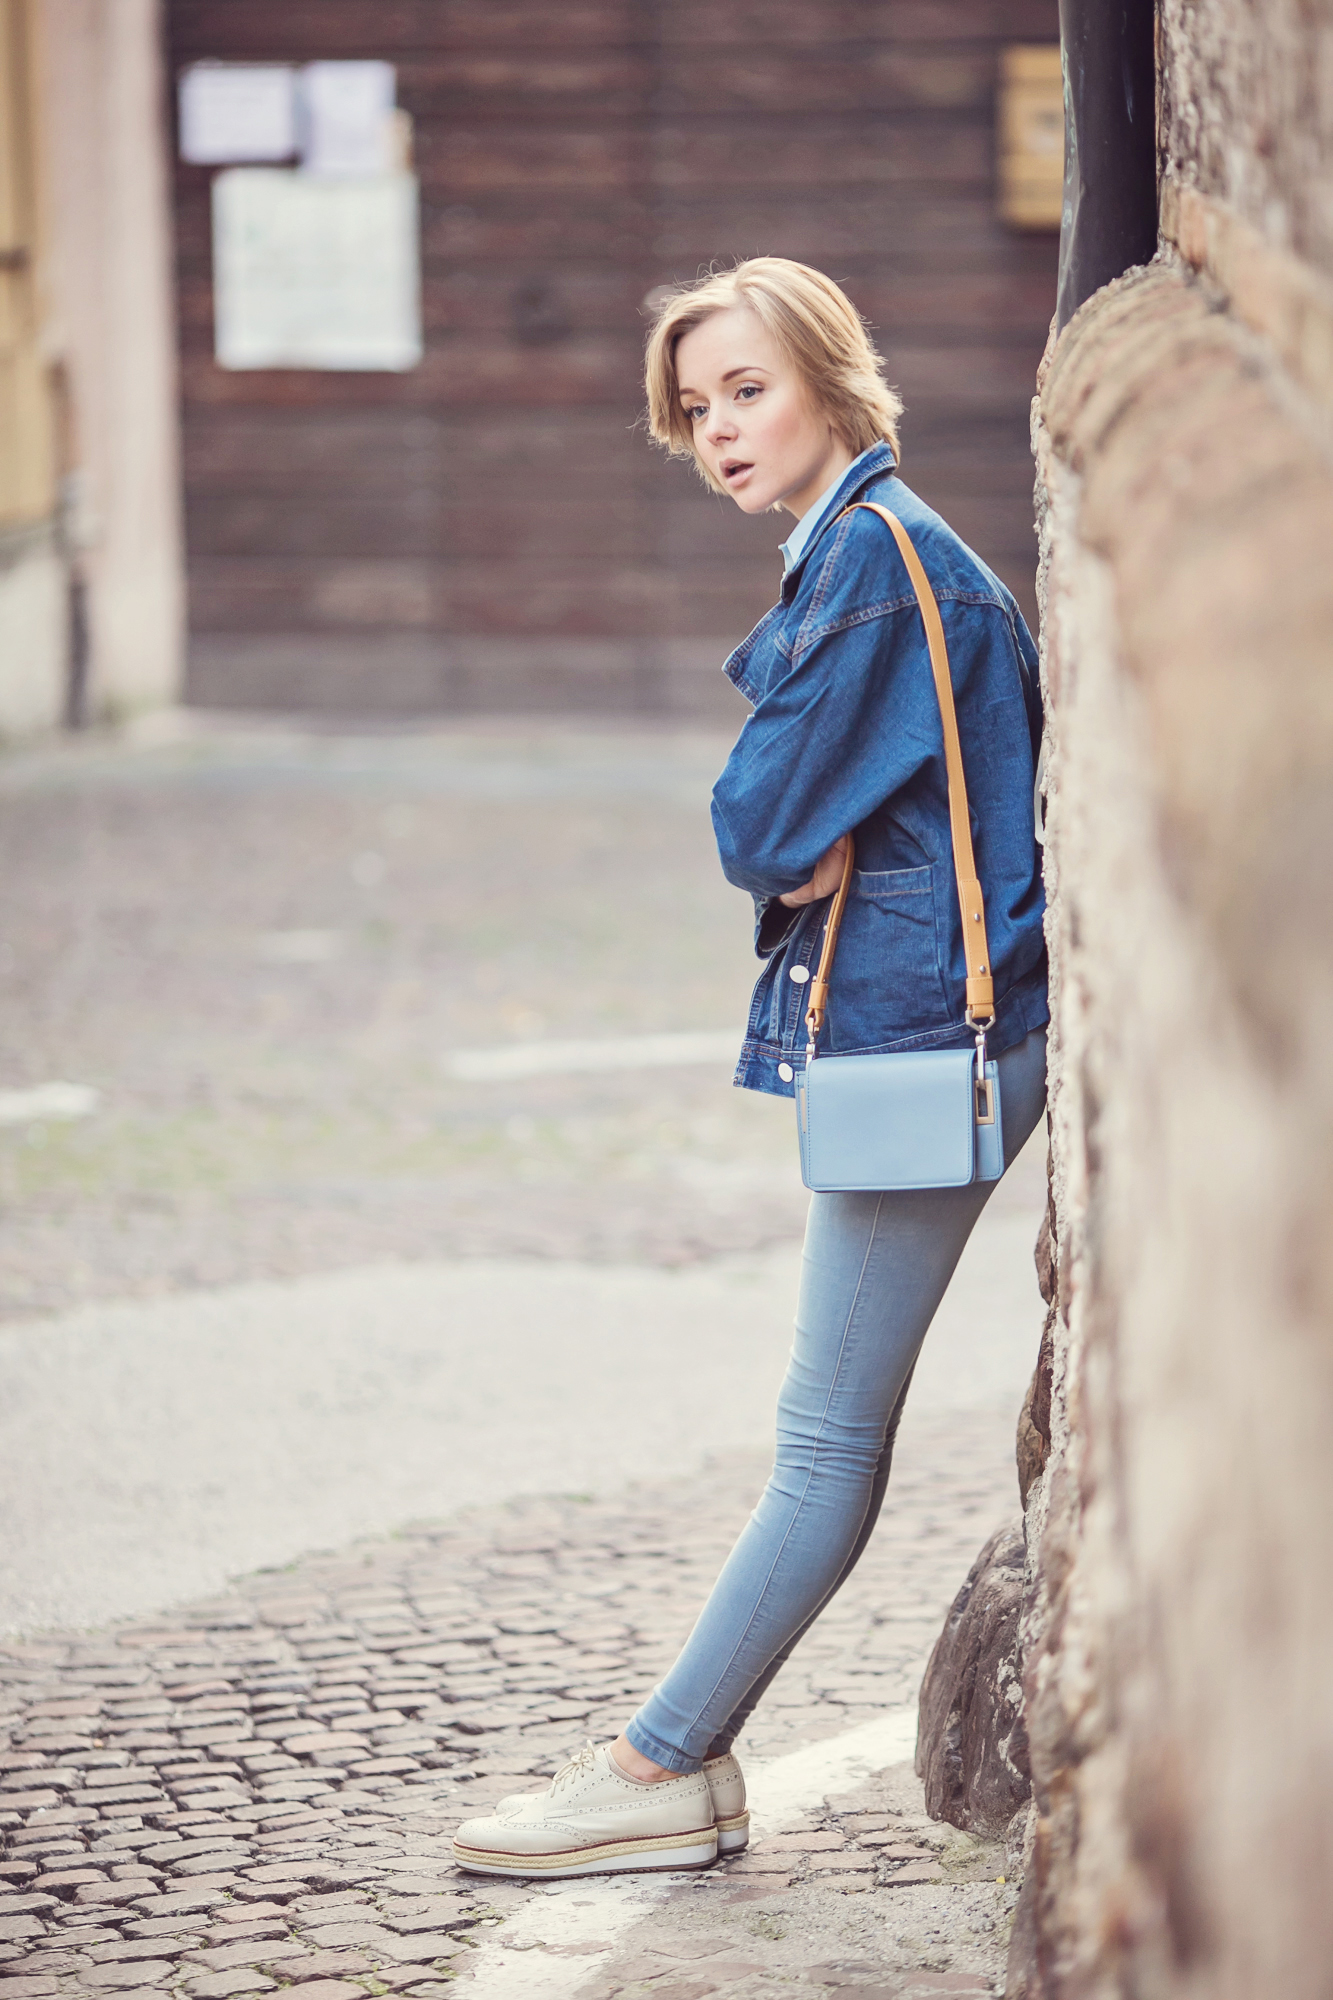 darya kamalova from thecablook com on the vintage flea market in lonato in italy wearing and other stories bag, dr.denim jeans and pollini flatform brogues-27